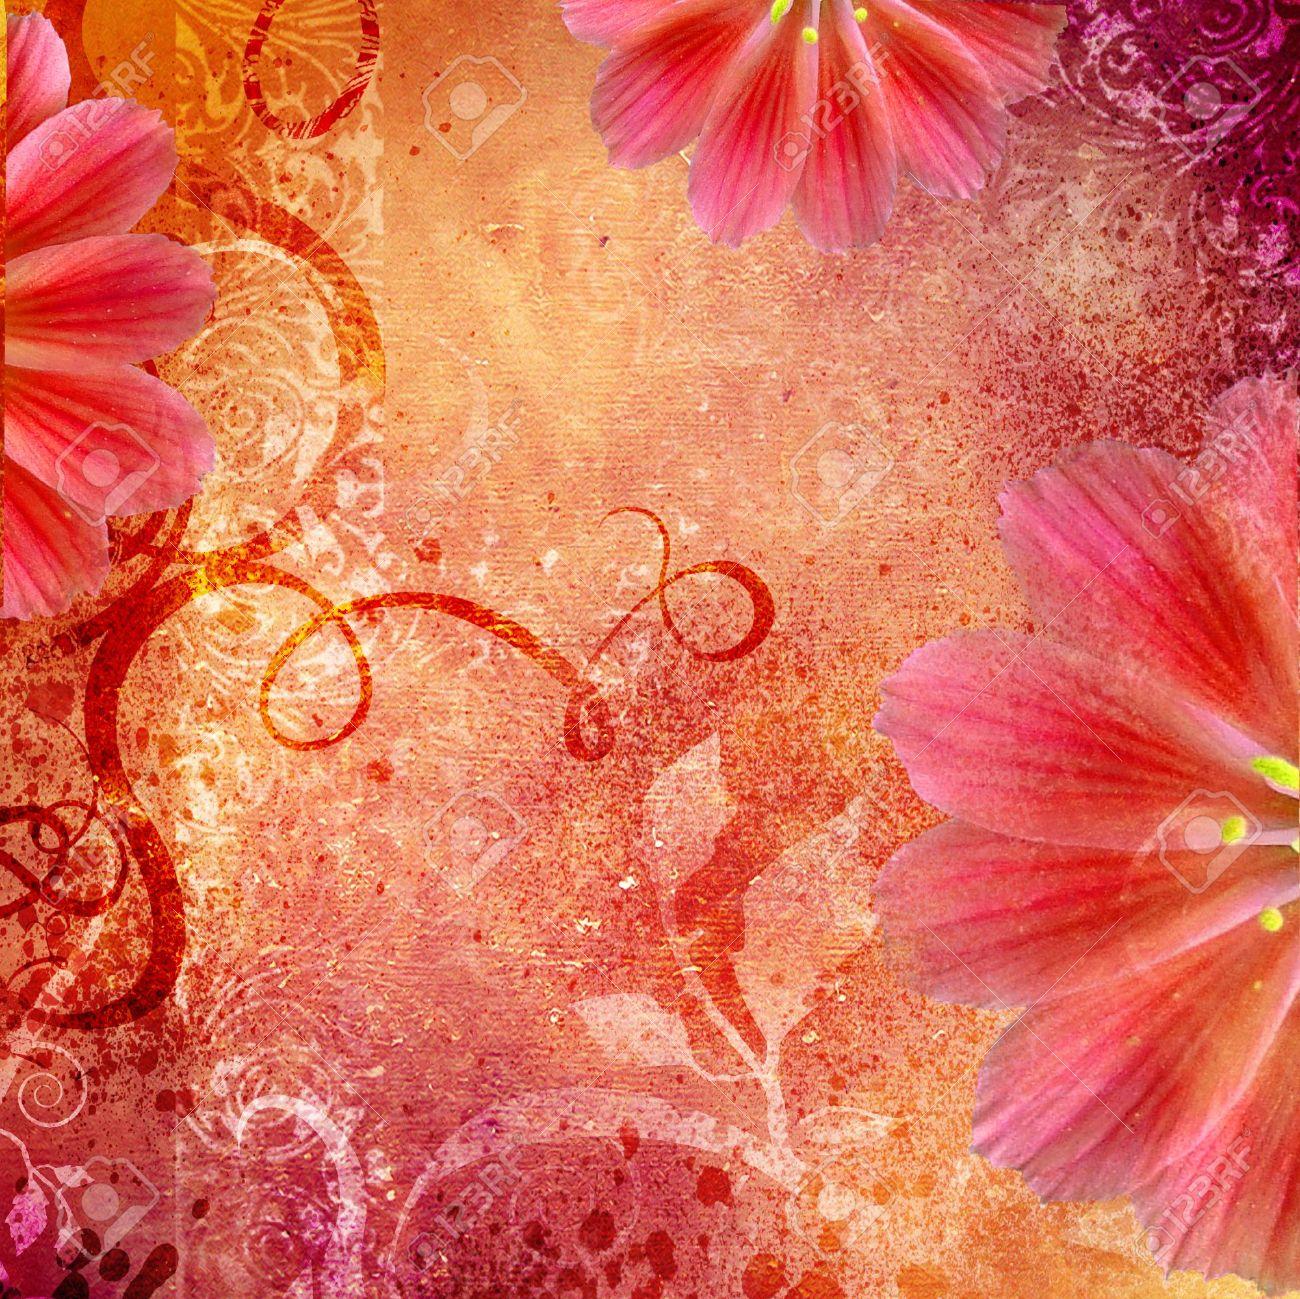 Decoartive Floral Background In Orange Pink Colors Stock Photo